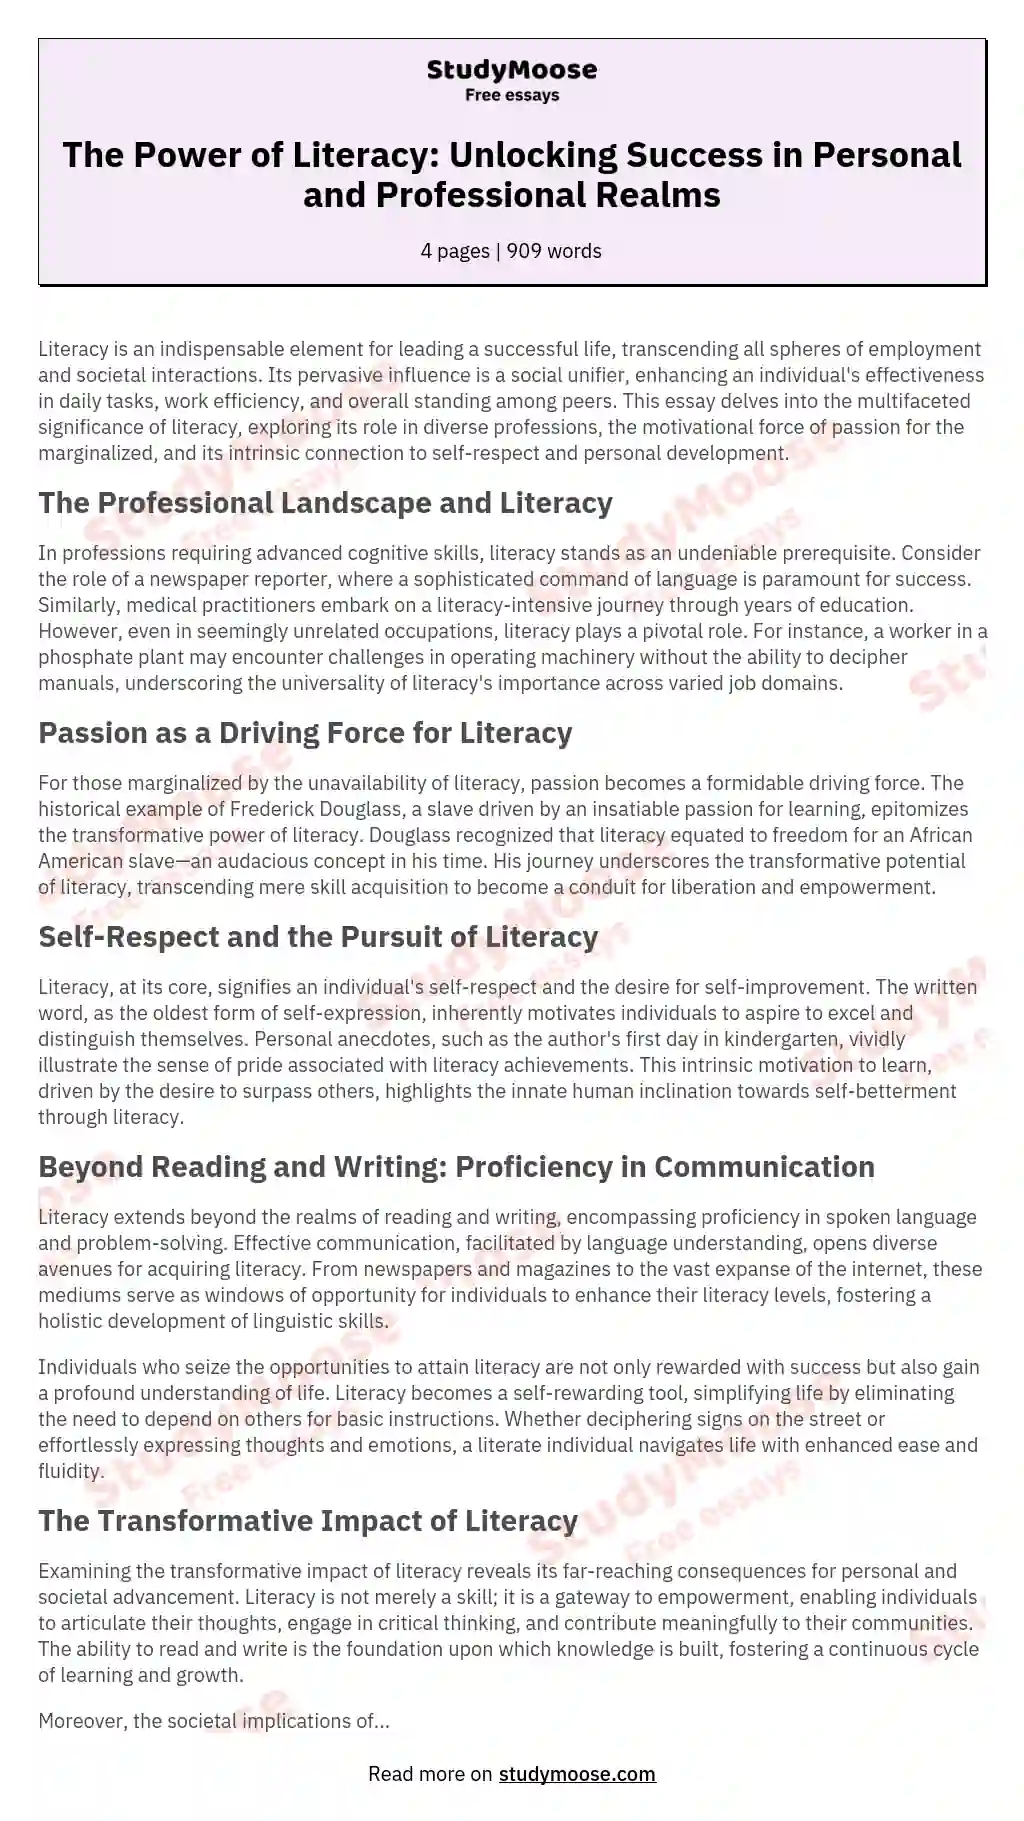 The Power of Literacy: Unlocking Success in Personal and Professional Realms essay